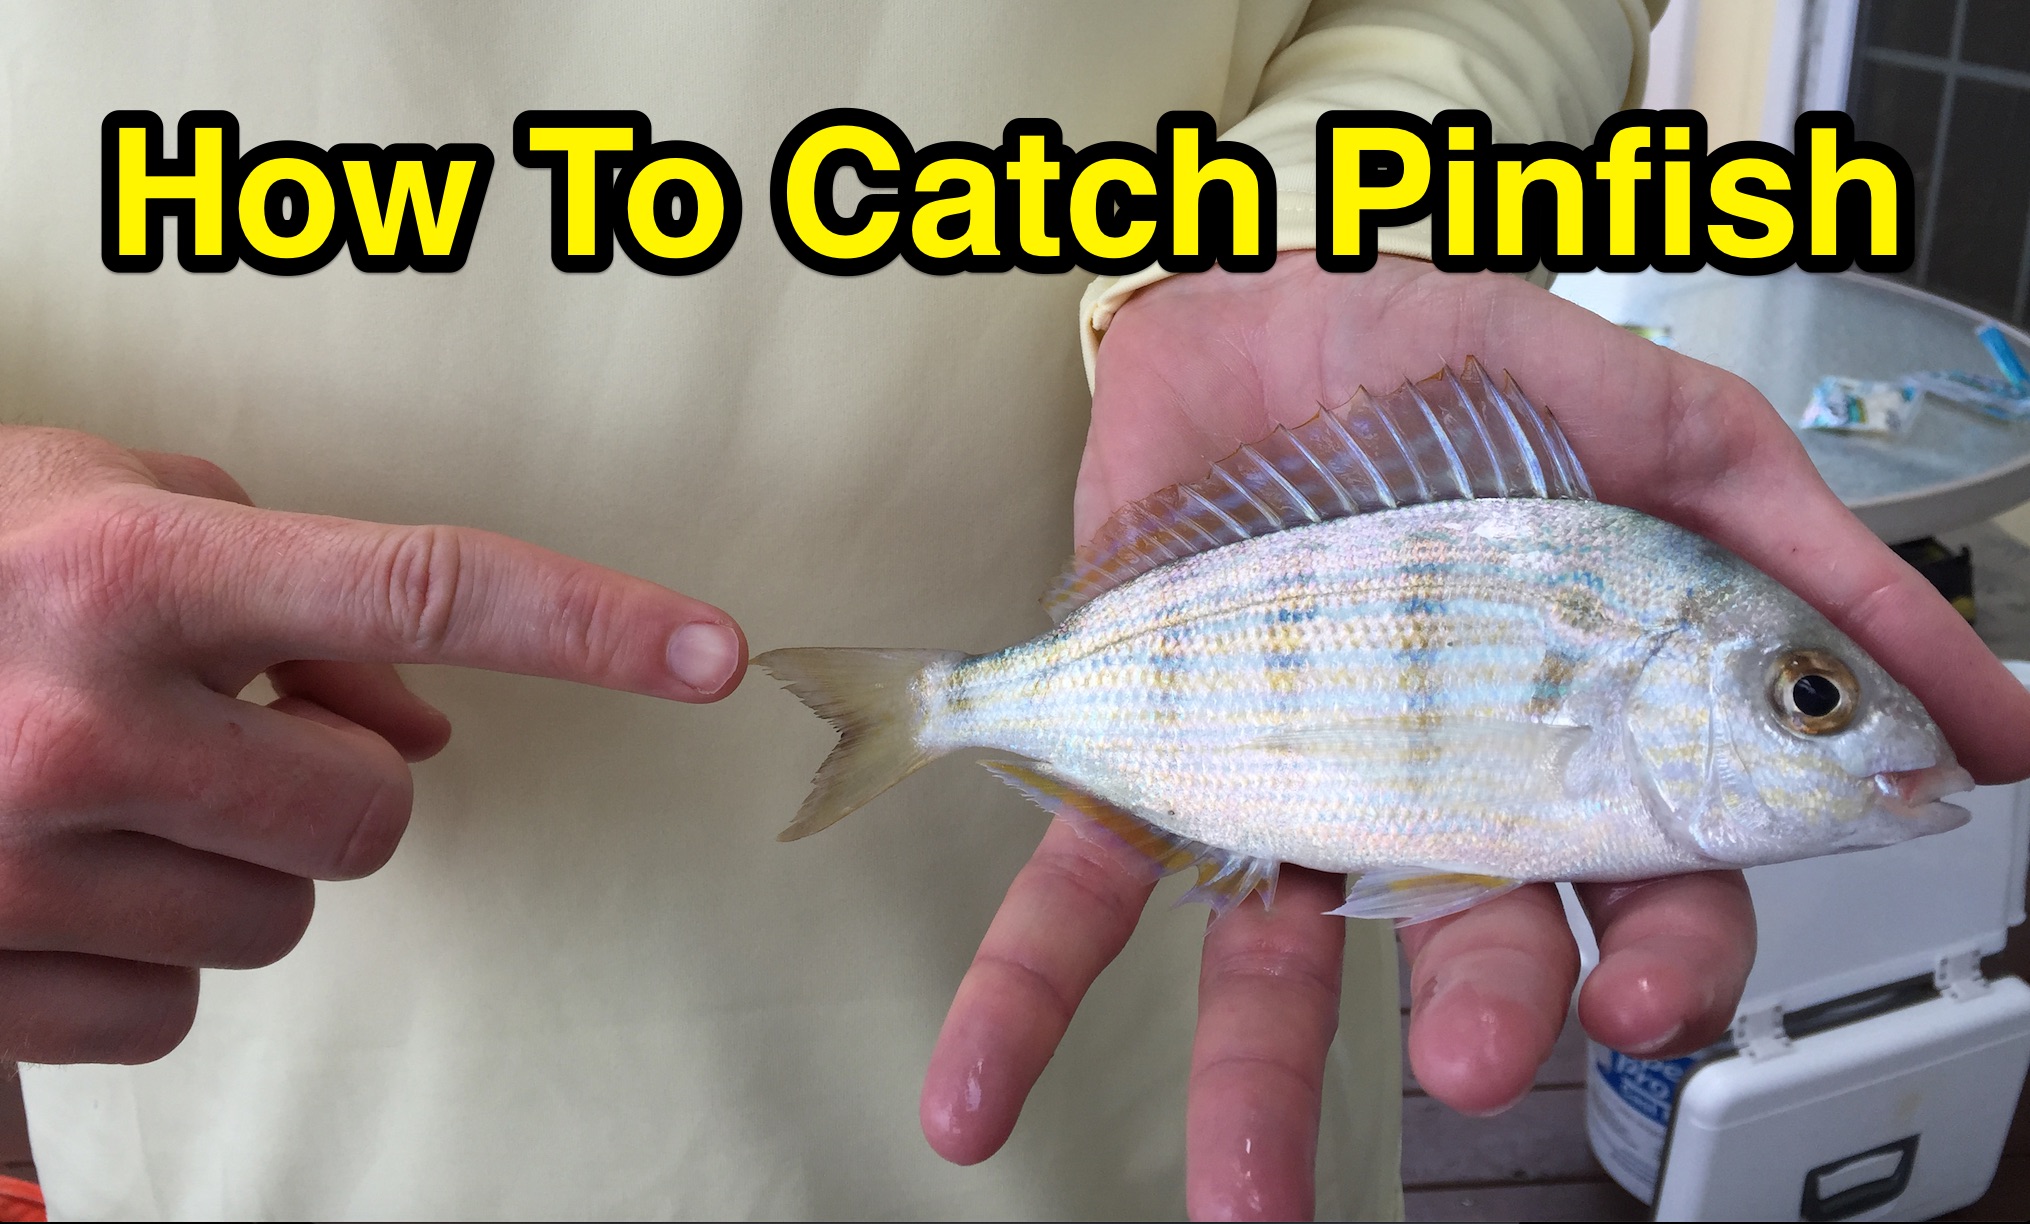 How To Catch Pinfish For Bait Without A Net Or Trap [Video